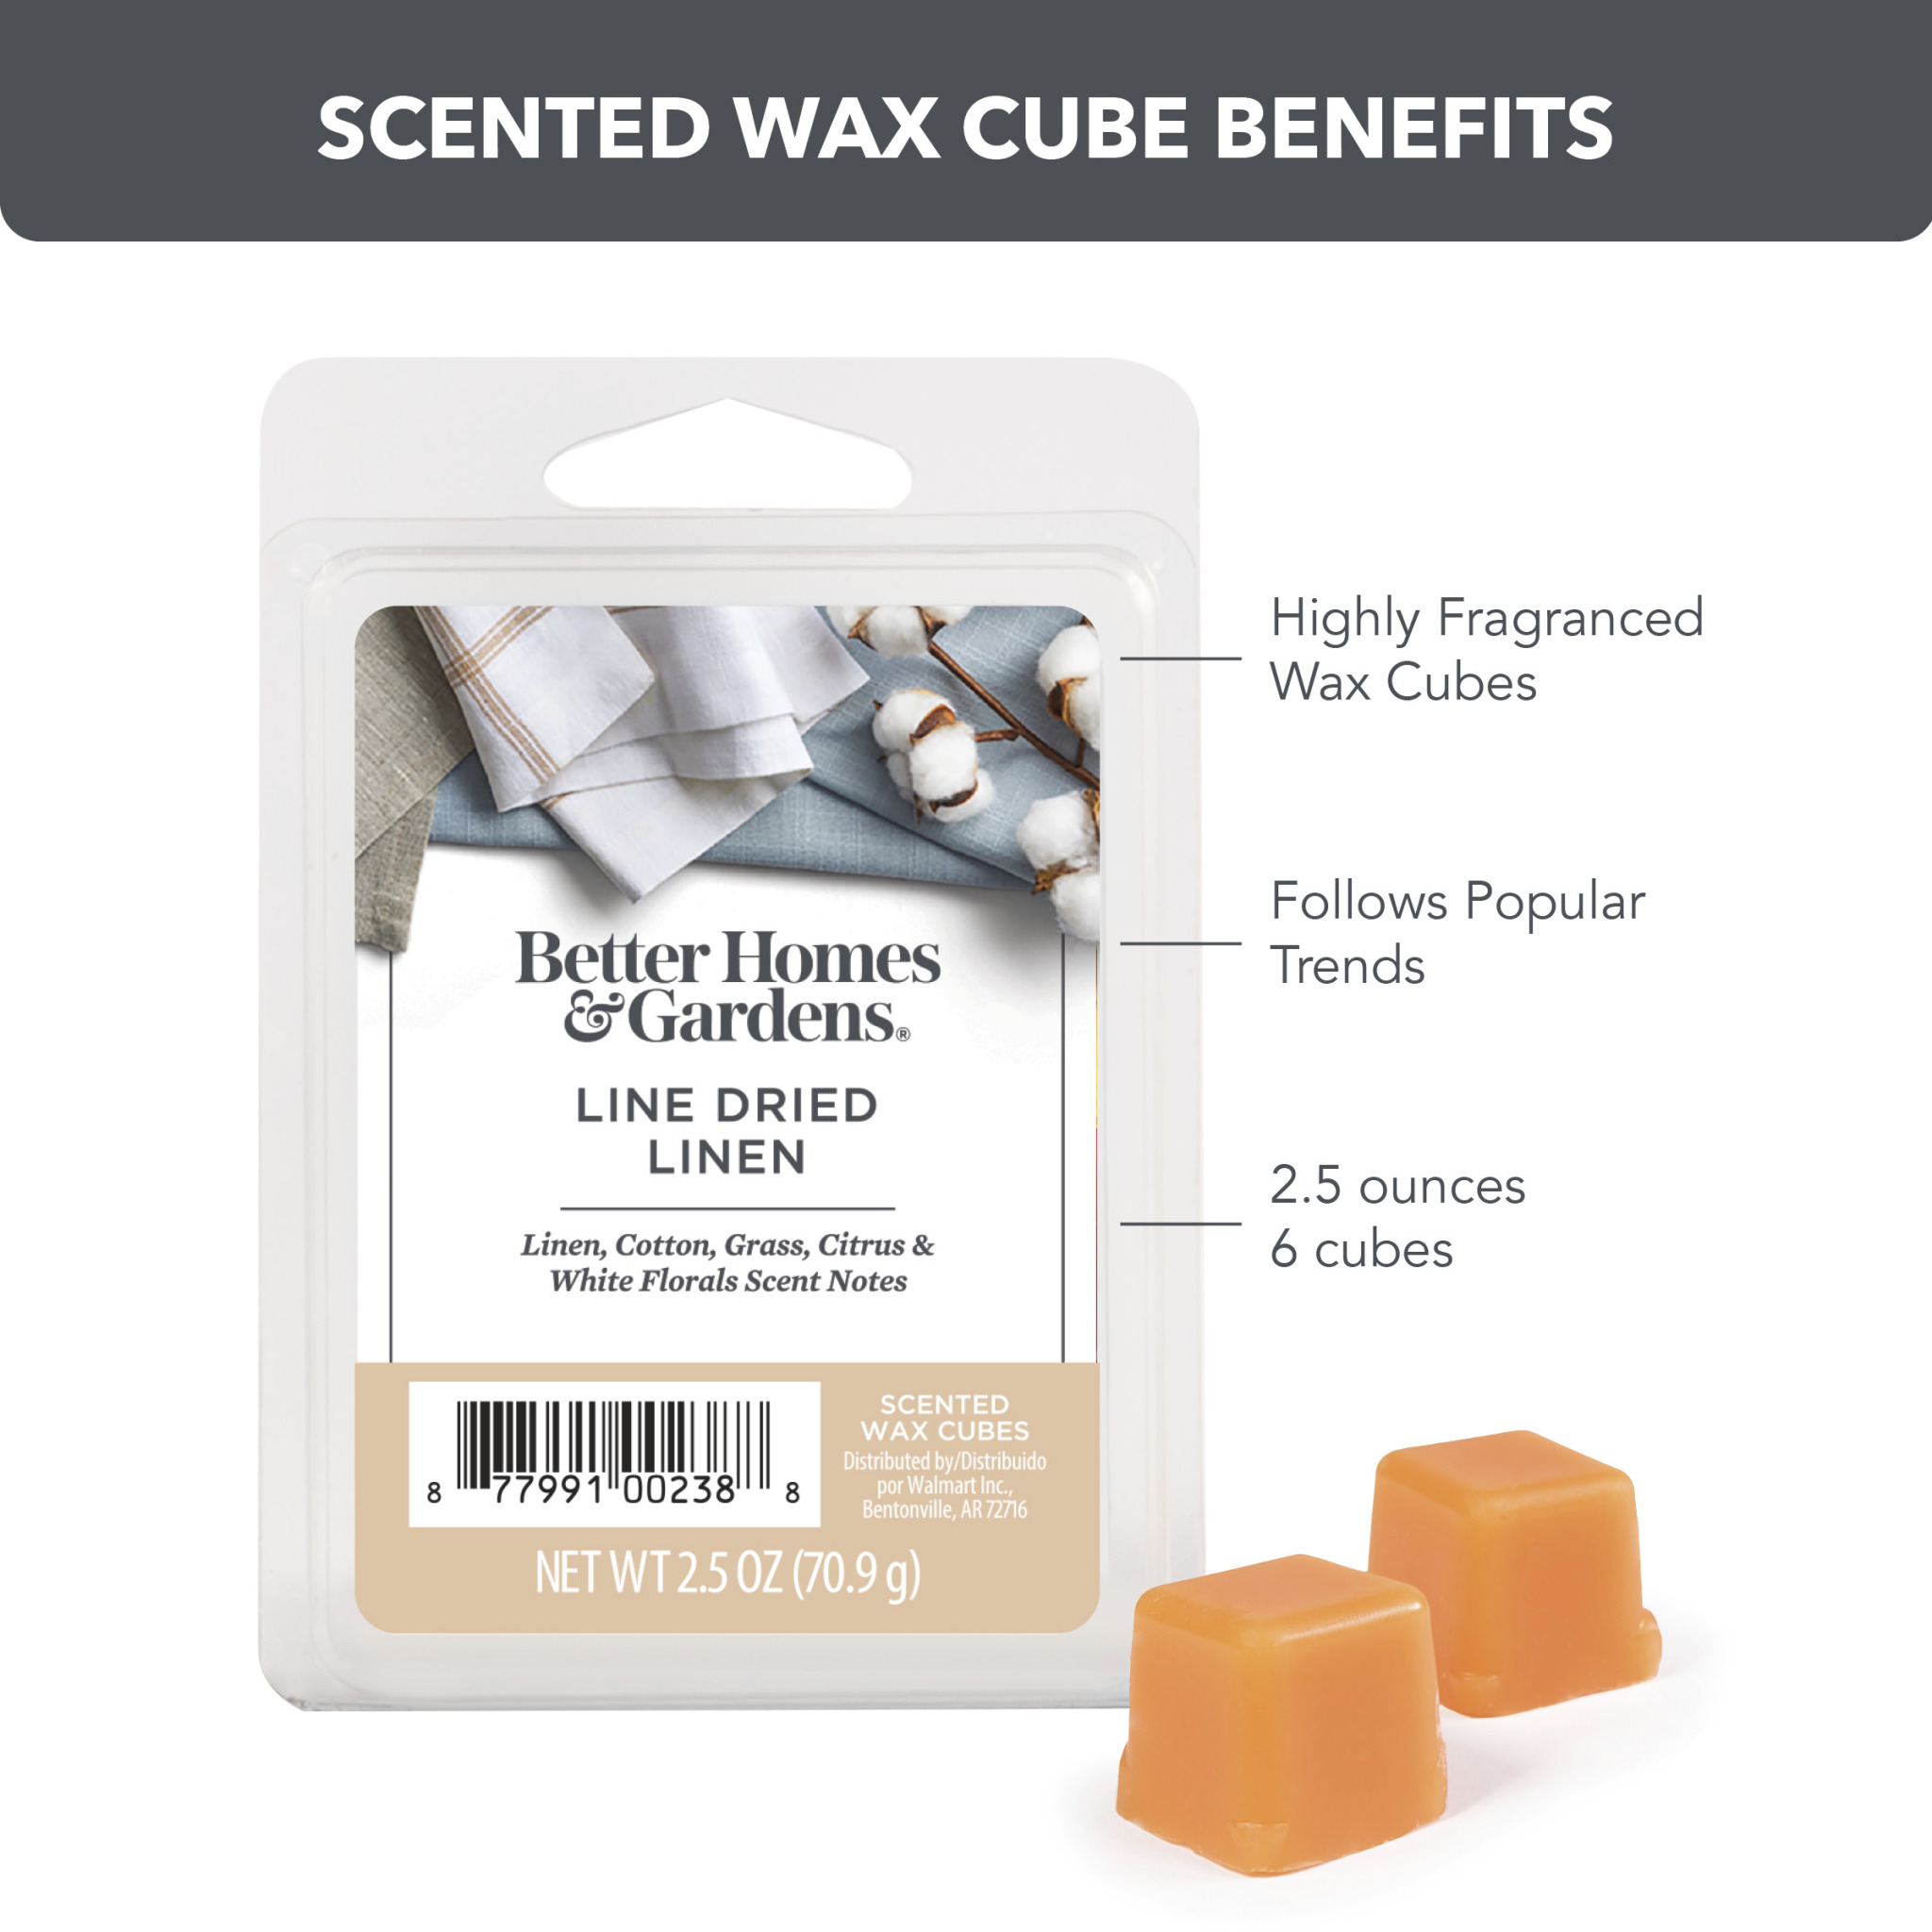 Line-Dried Linen Scented Wax Melts, Better Homes & Gardens, 2.5 oz (1-Pack) - image 6 of 10